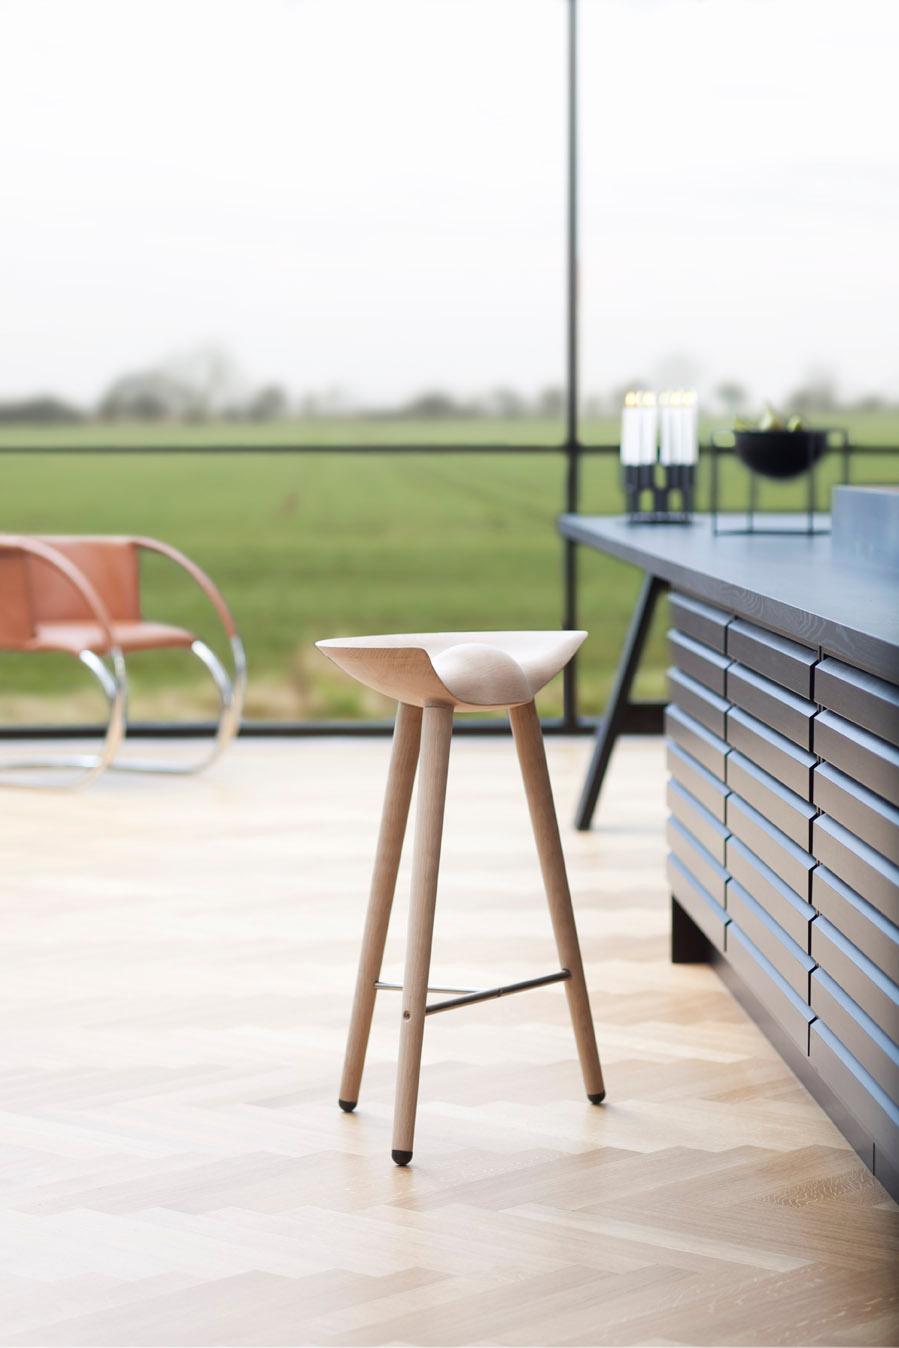 ML 42 Brown oak and stainless steel counter stool by Lassen
Dimensions: H 69 x W 36 x L 55.5 cm
Materials: Oak, Stainless Steel

In 1942 Mogens Lassen designed the Stool ML42 as a piece for a furniture exhibition held at the Danish Museum of